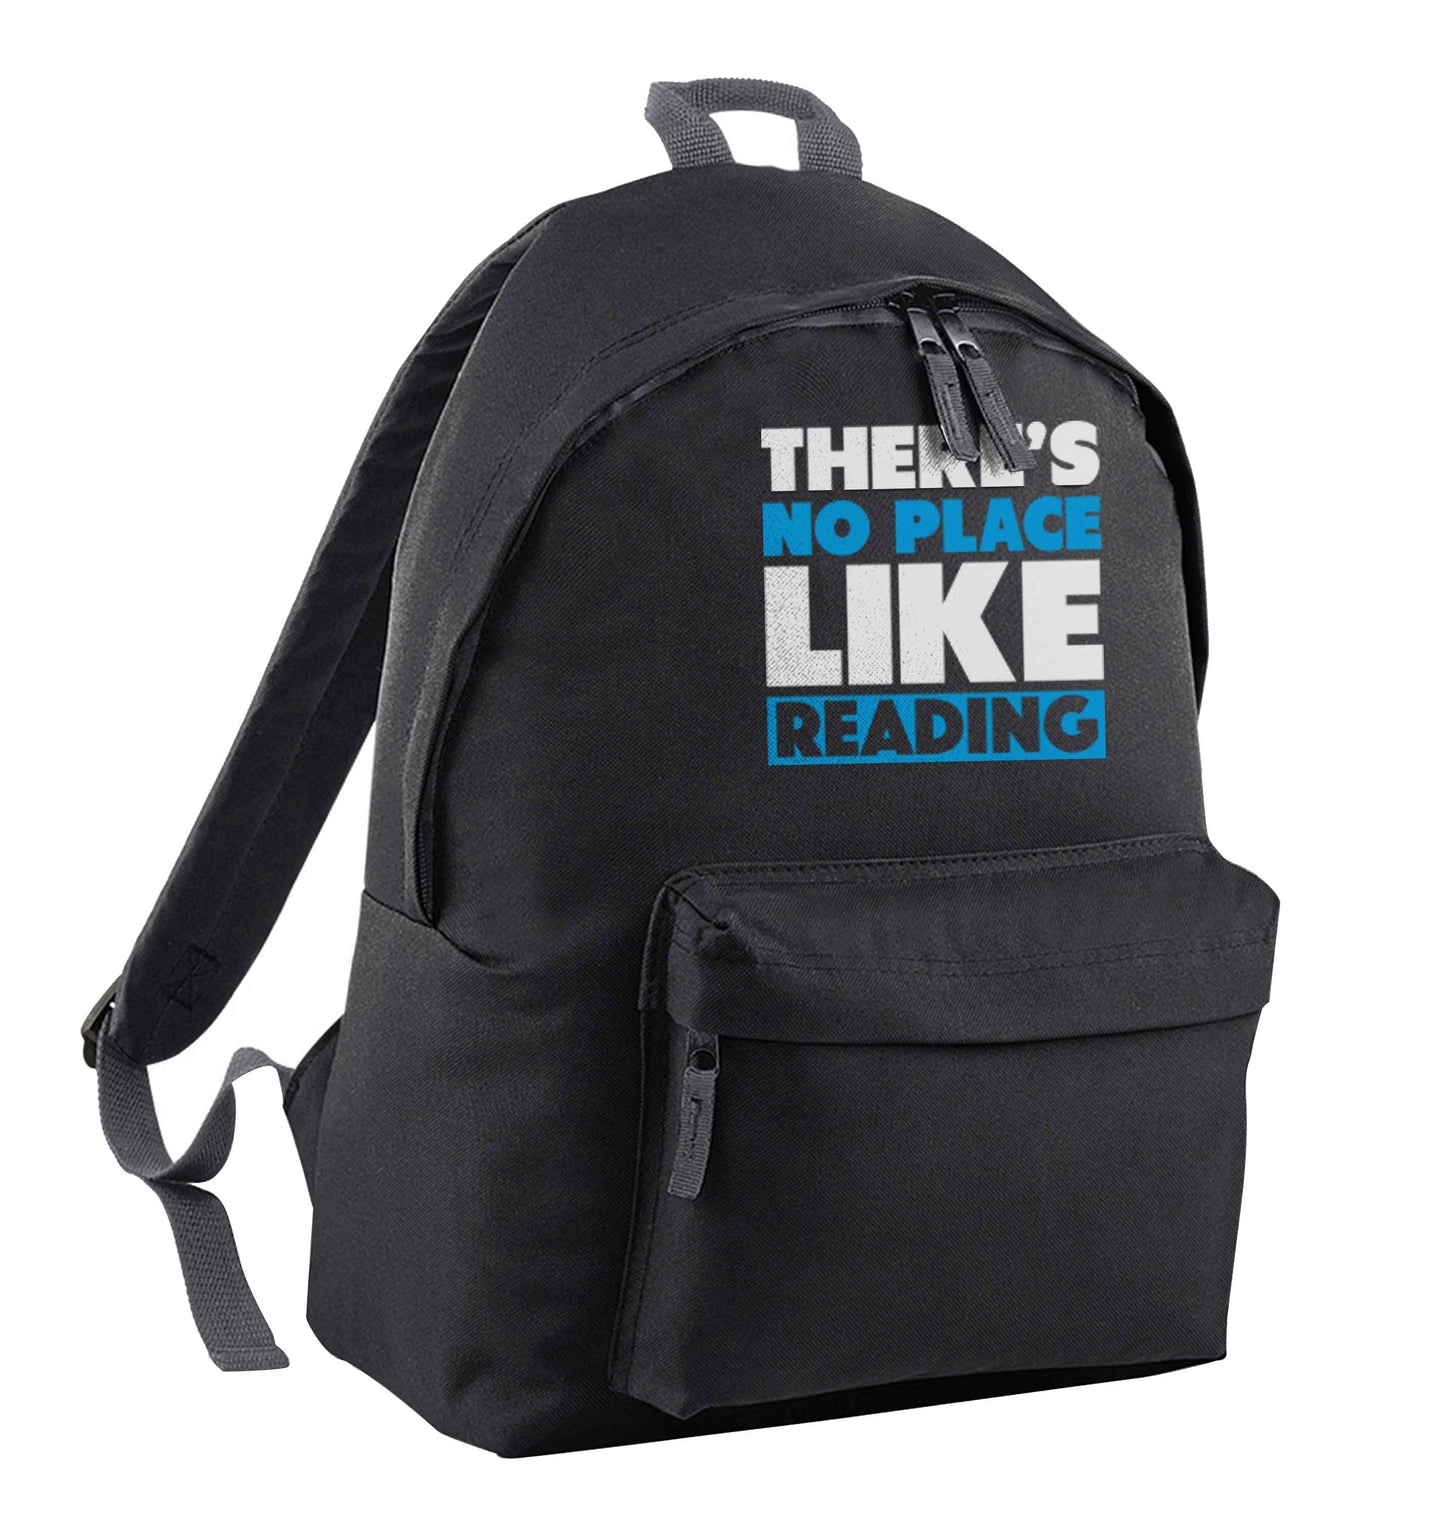 There's no place like Readingblack children's backpack